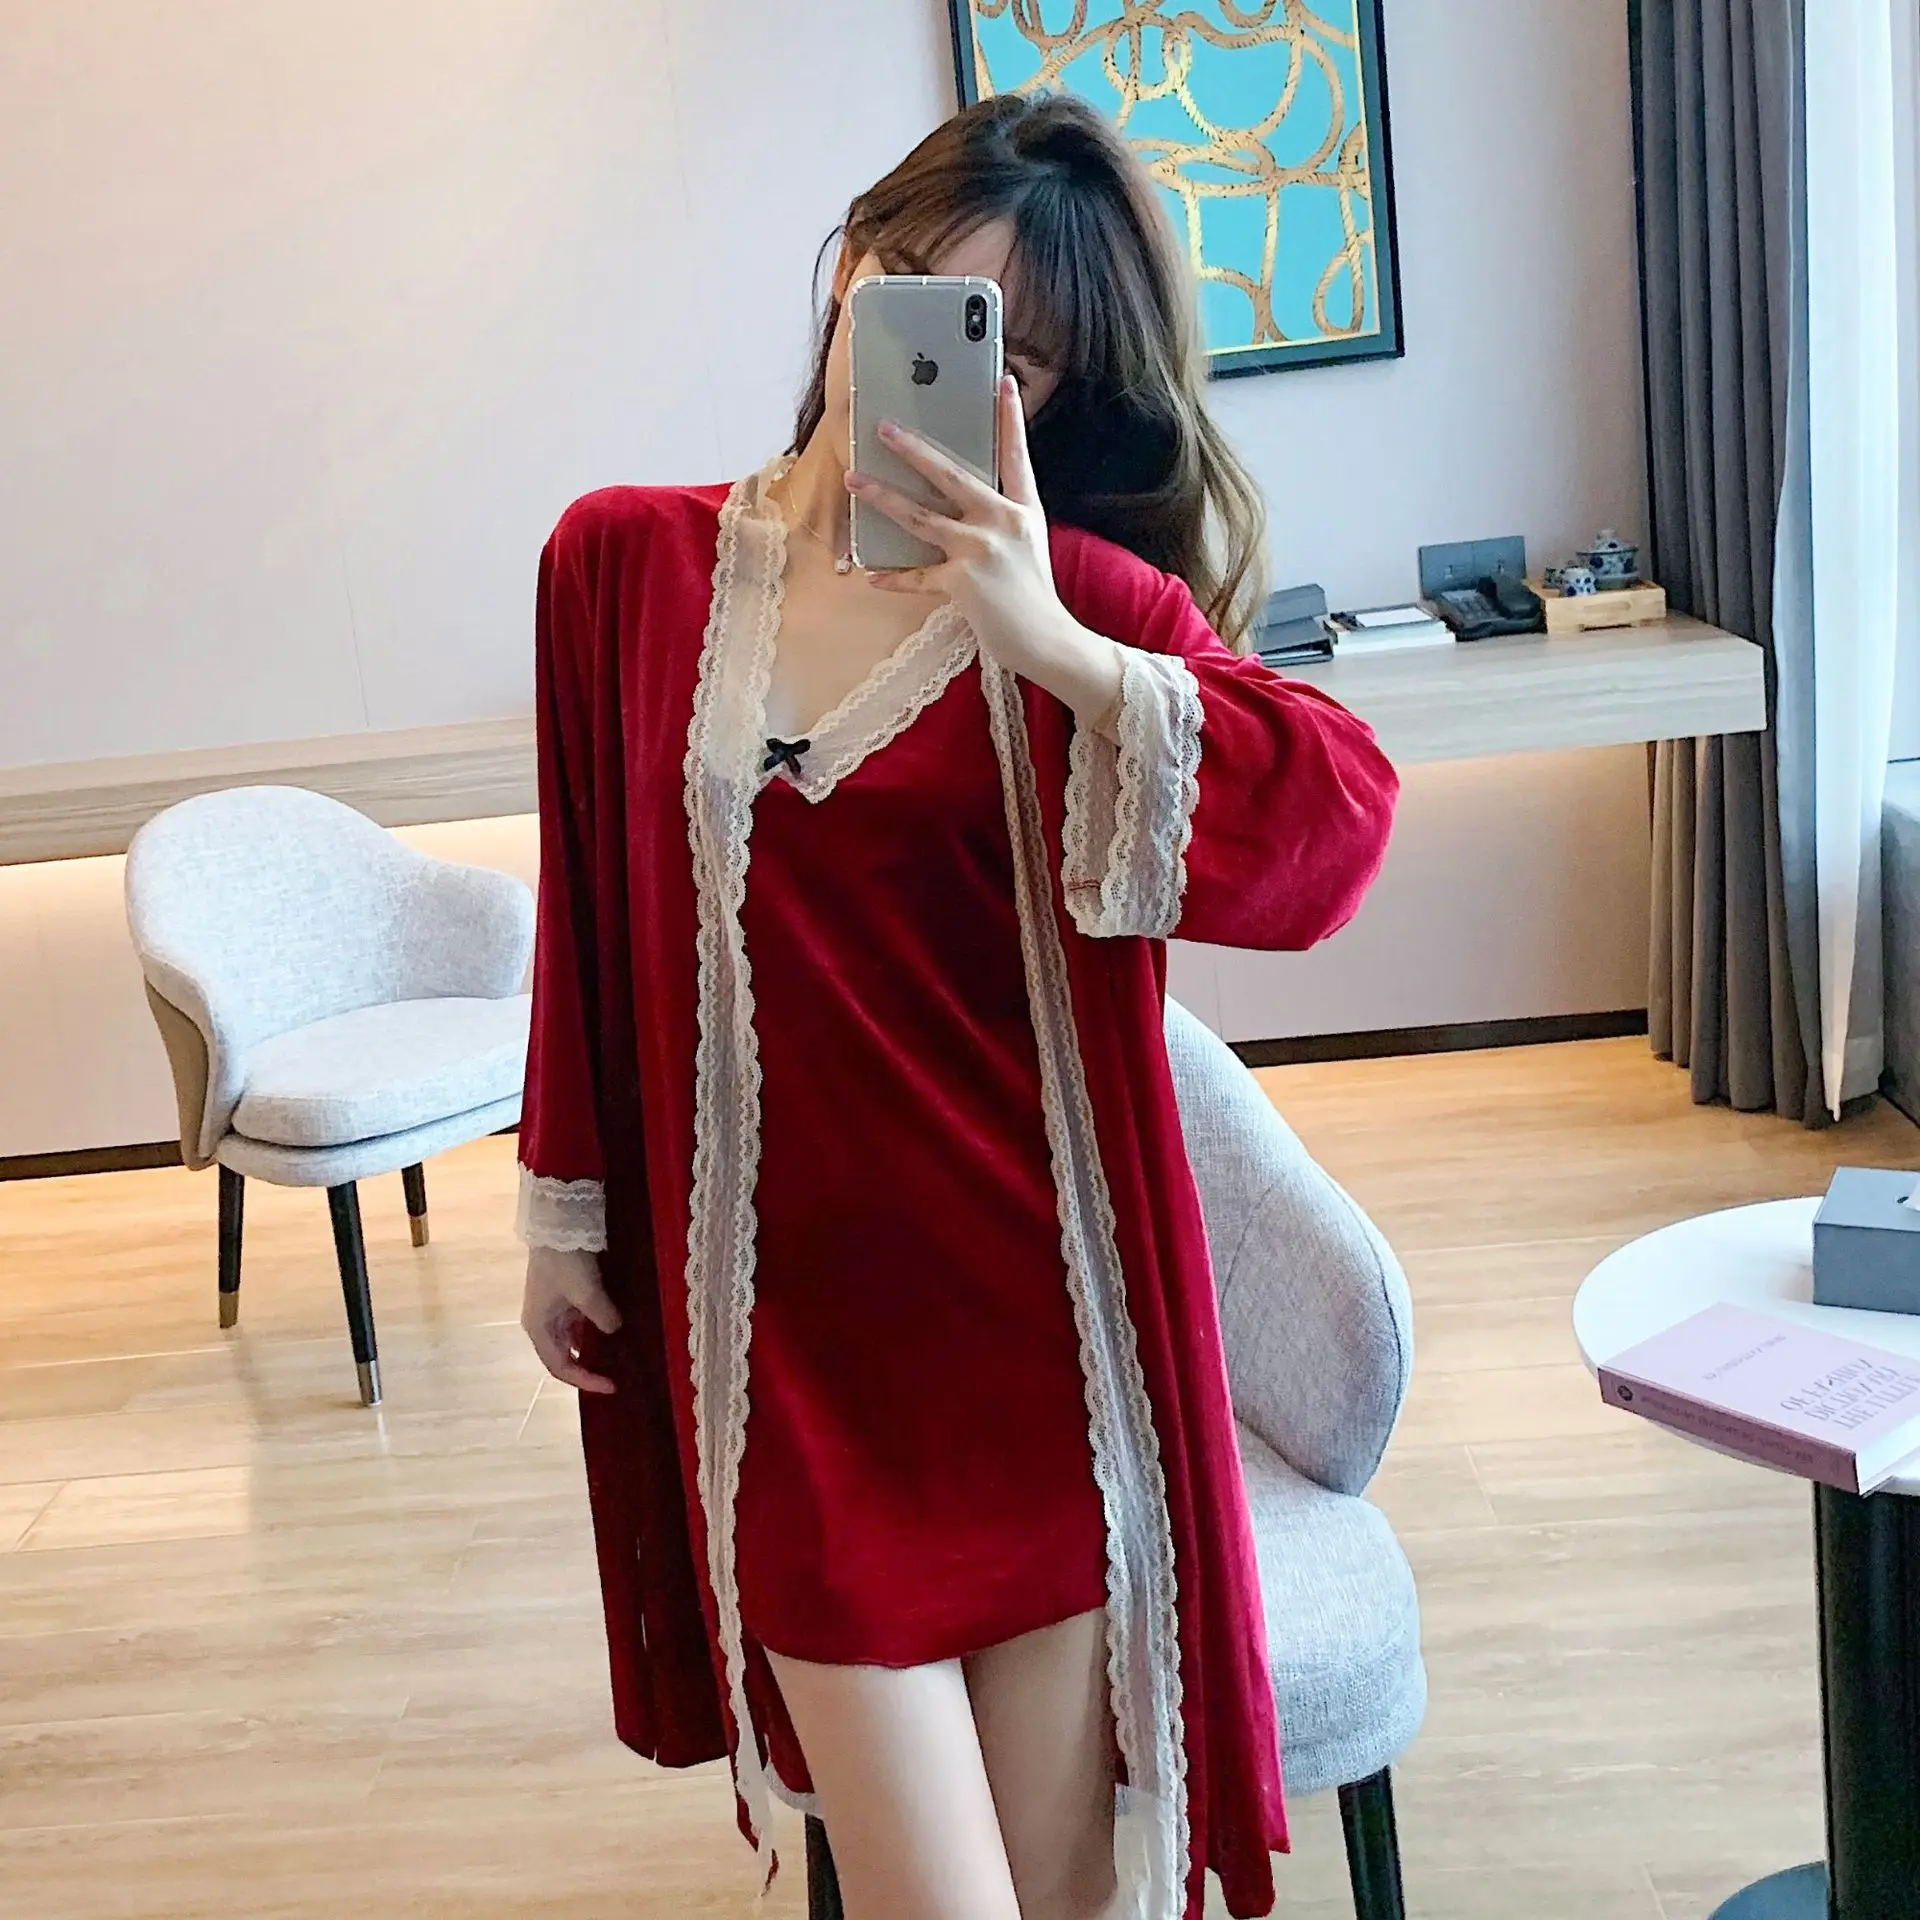 

Velour 2PCS Women Robe Sets Sexy Backless Lace Nightdress Strap Top Nightgown Kimono Bride Dressing Gown Autumn Loose Homewear